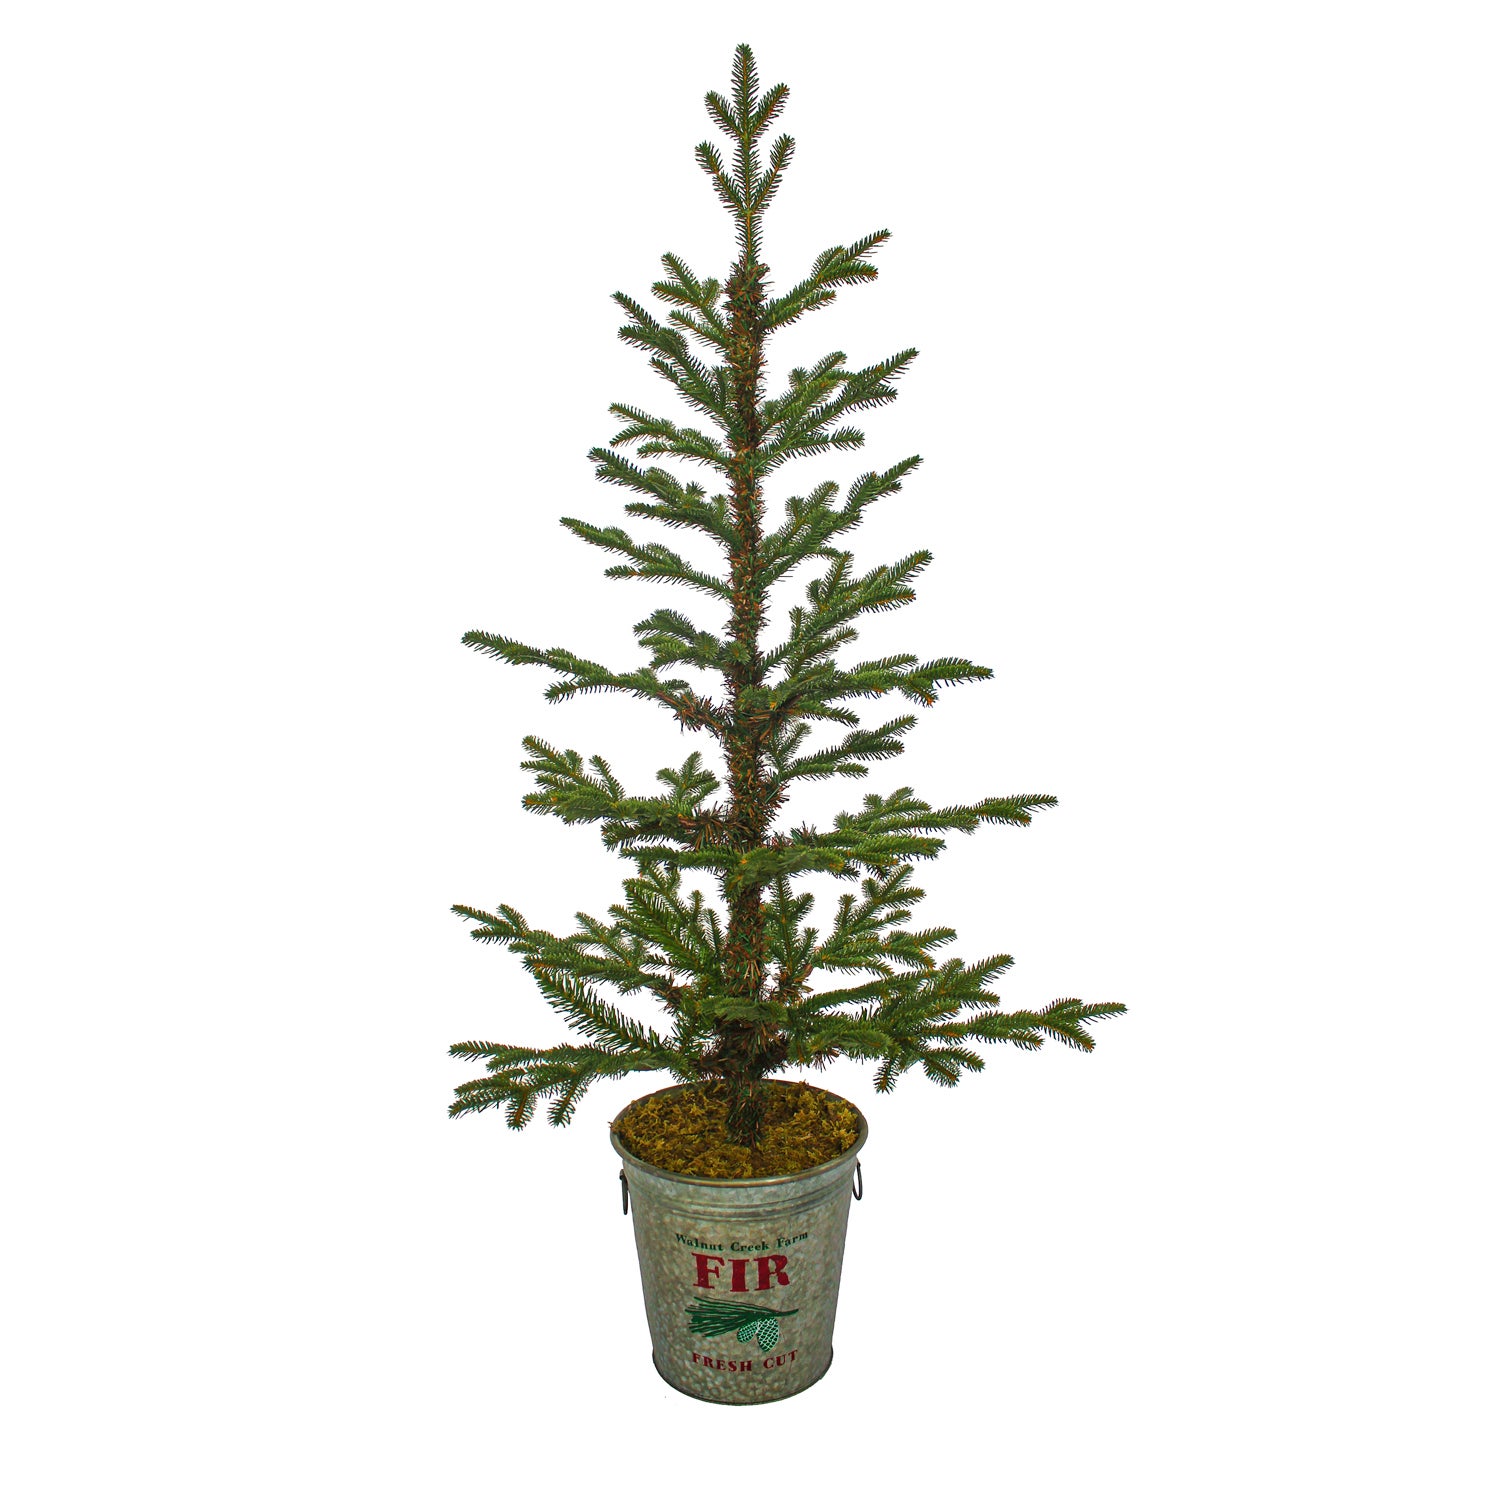 48"H Christmas Timberland Artifical Tree in Galvanized Holiday Bucket